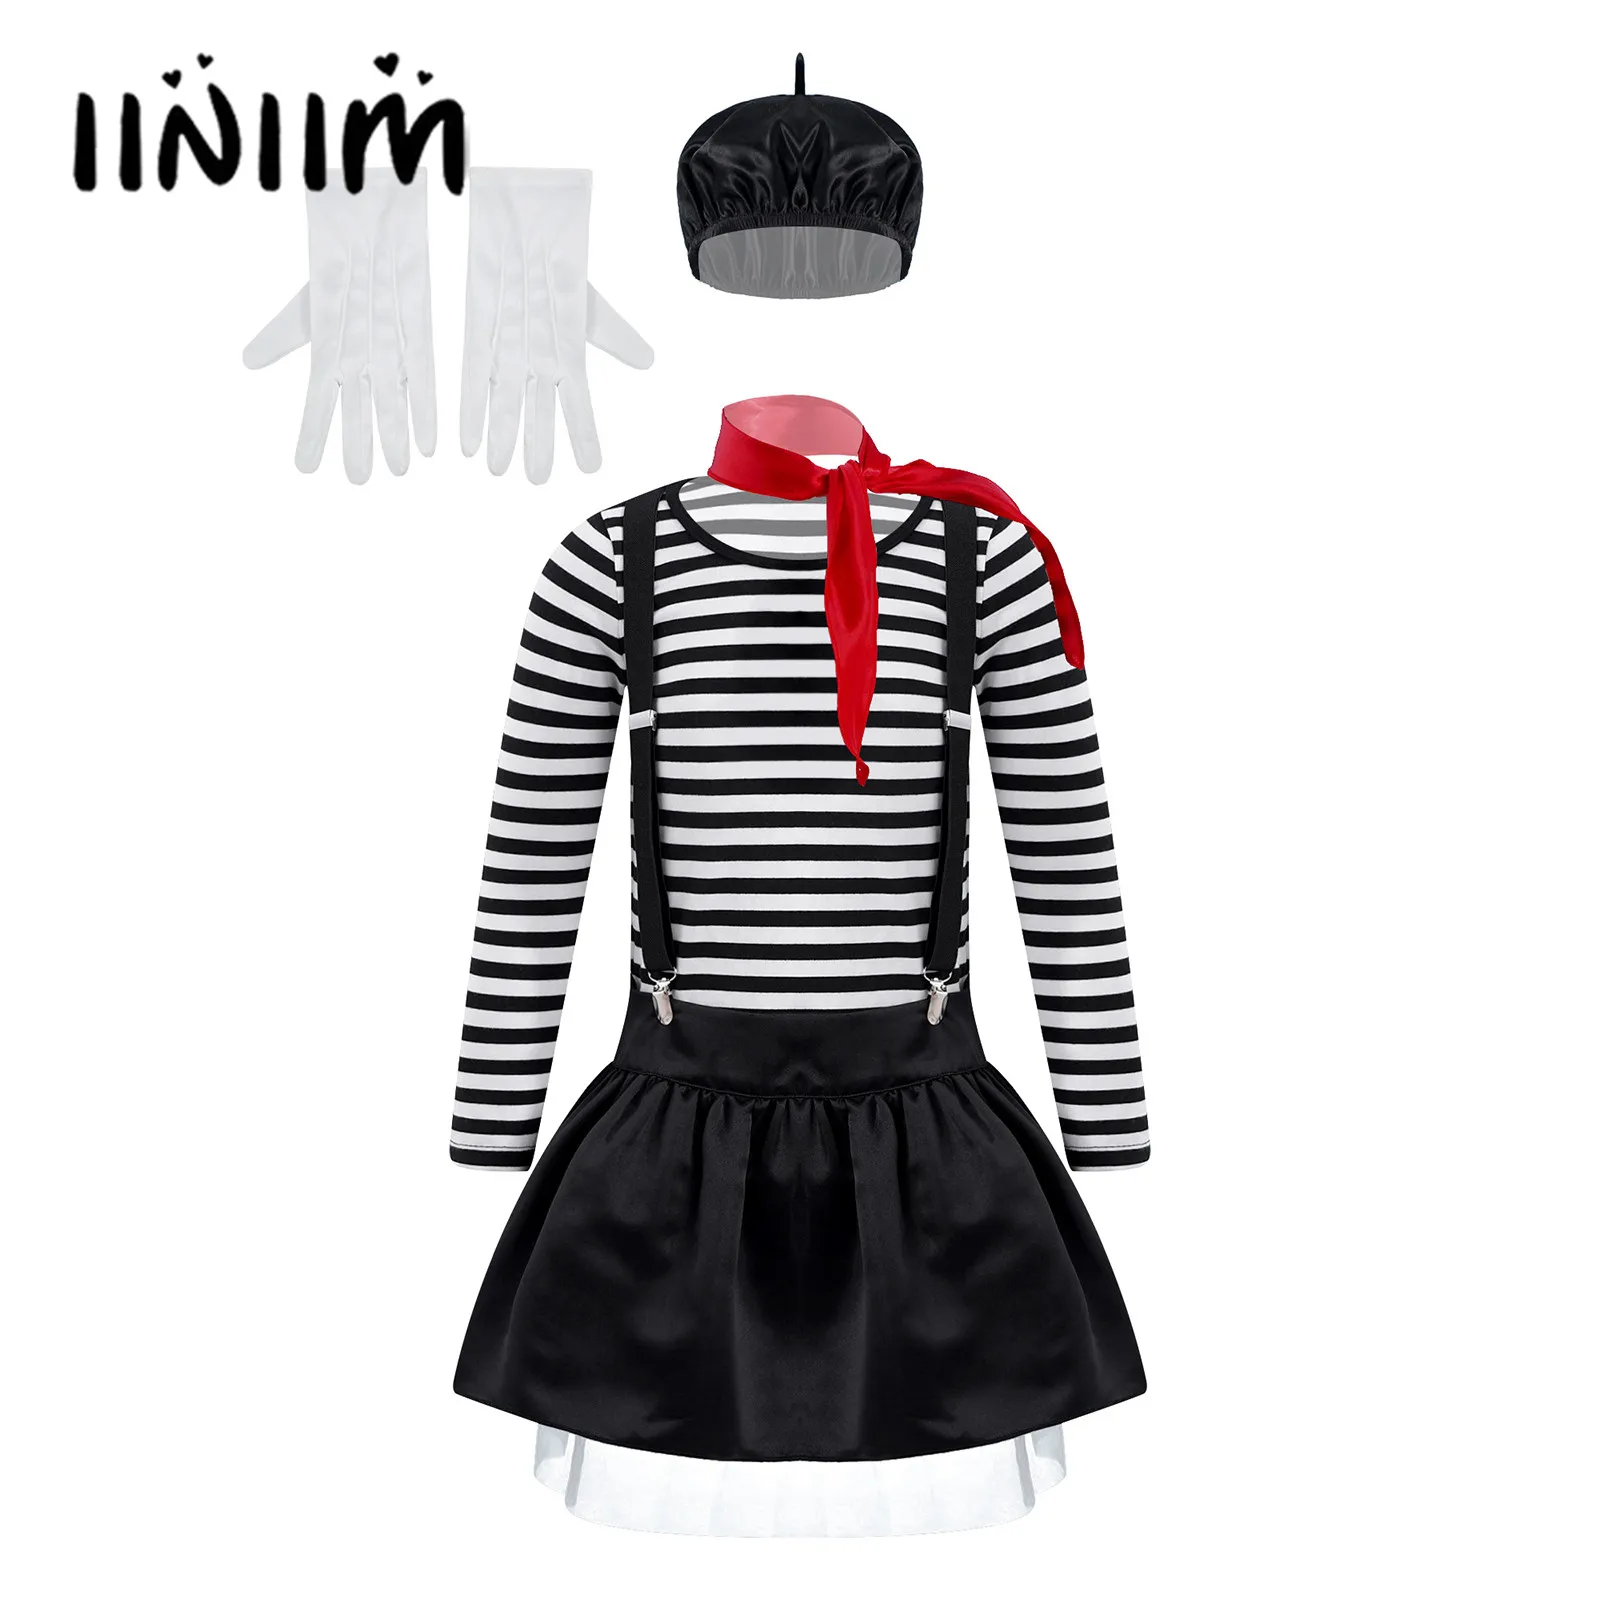 

Kids Girls Mime Aritist Artist Clown Circus Cosplay Costume Print Tops with Suspenders Skirt Scarf Beret Hat and Gloves Set